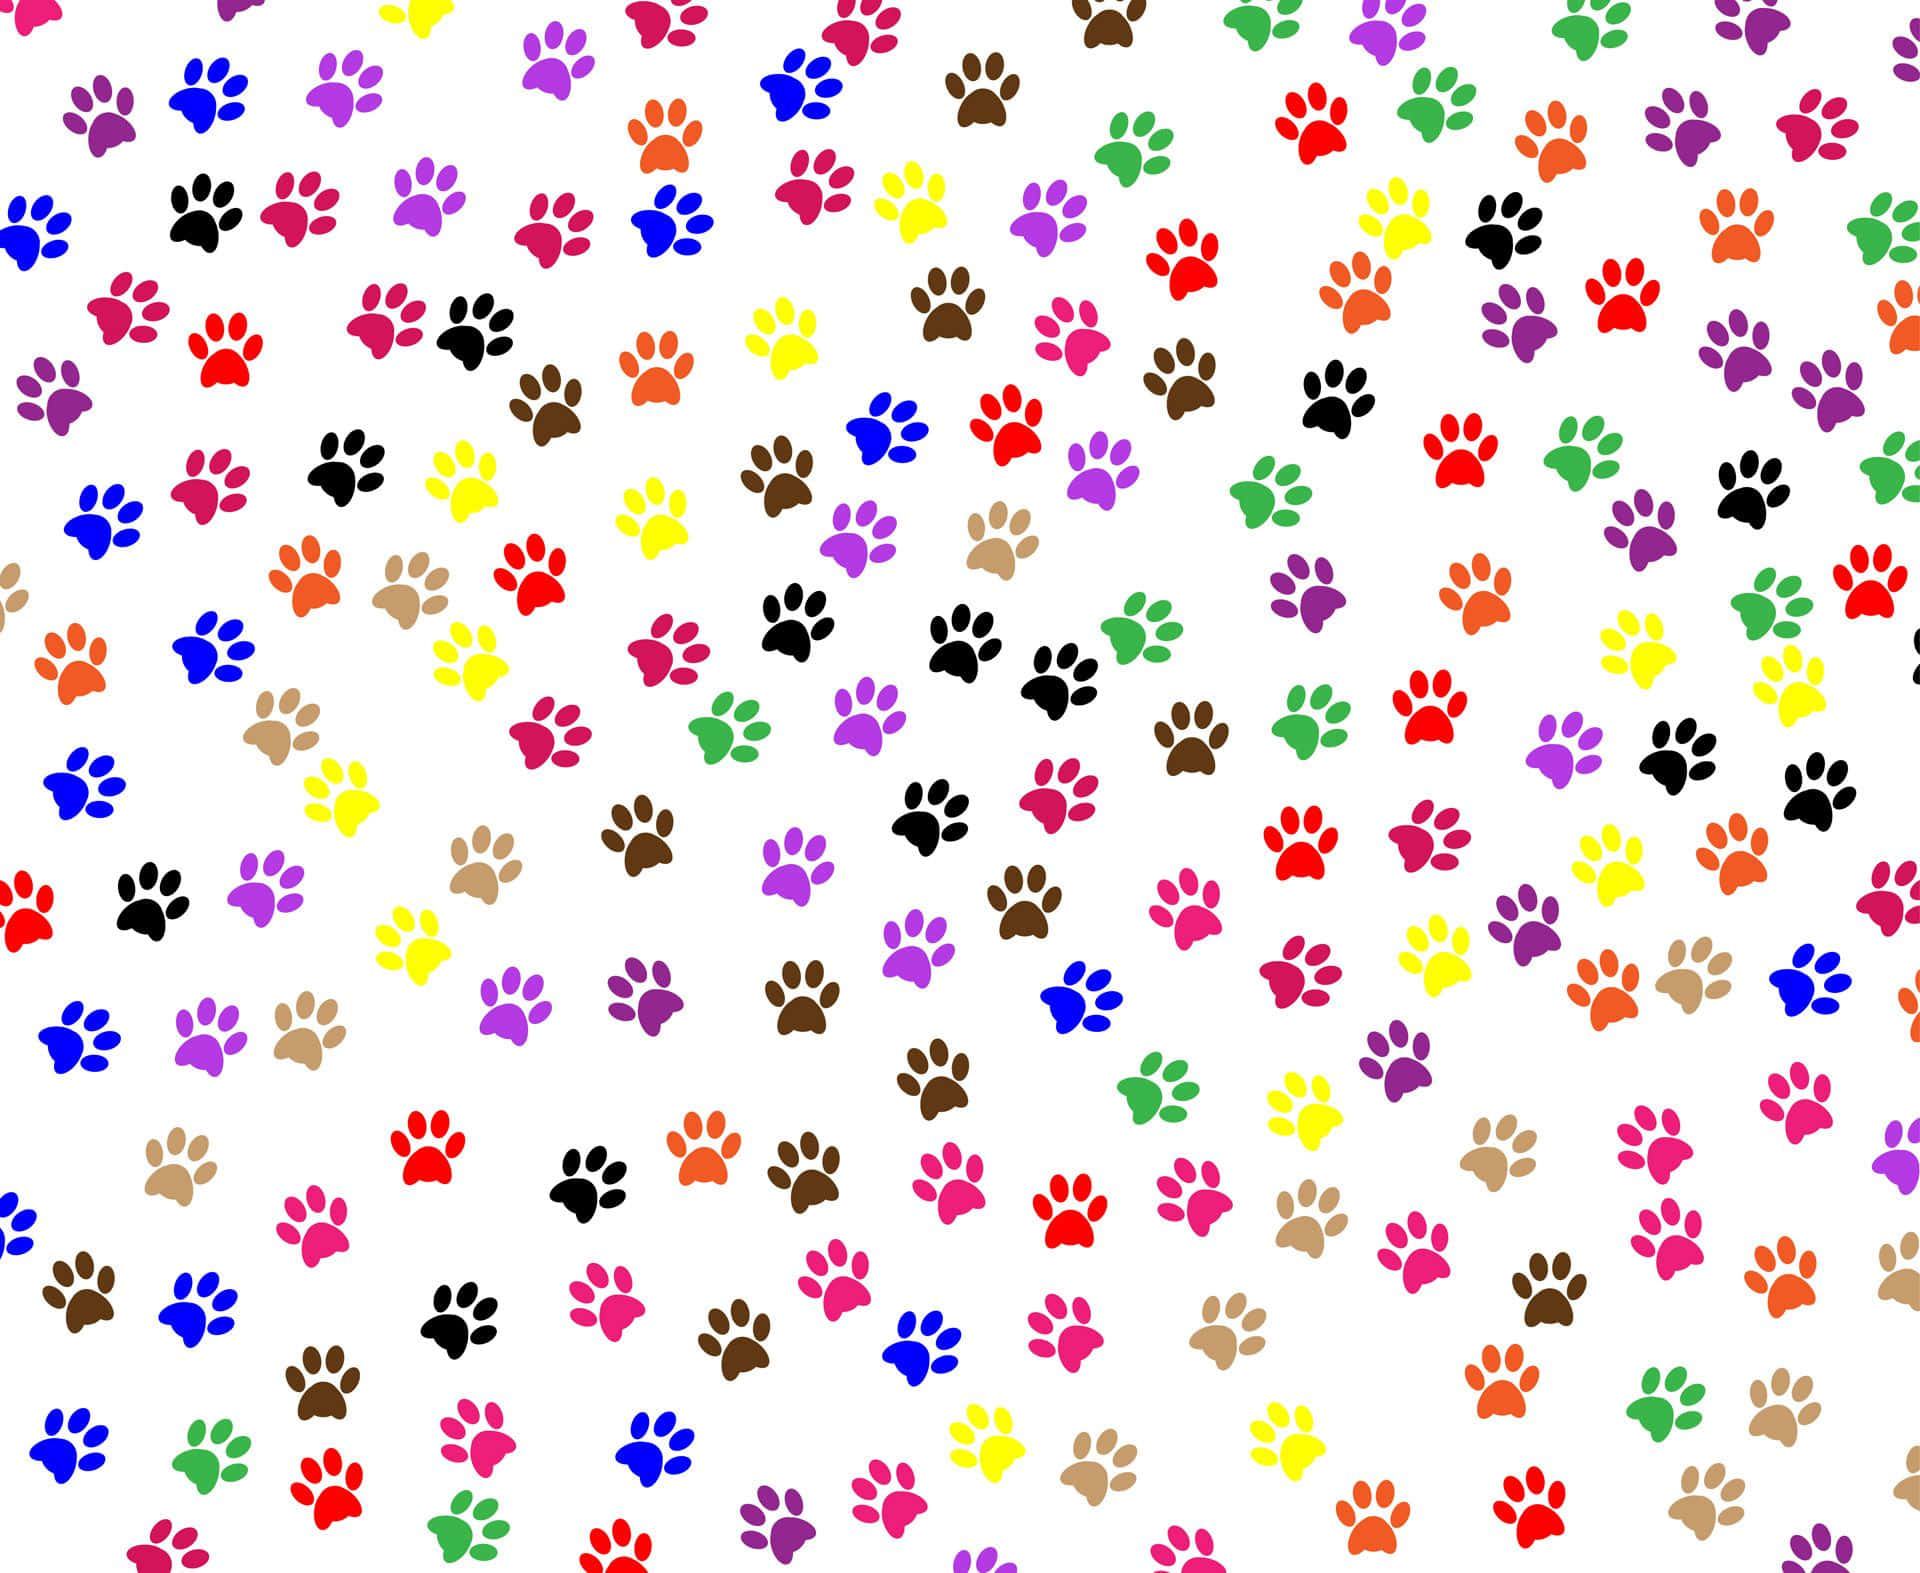 A Colorful Pattern Of Paw Prints On A White Background